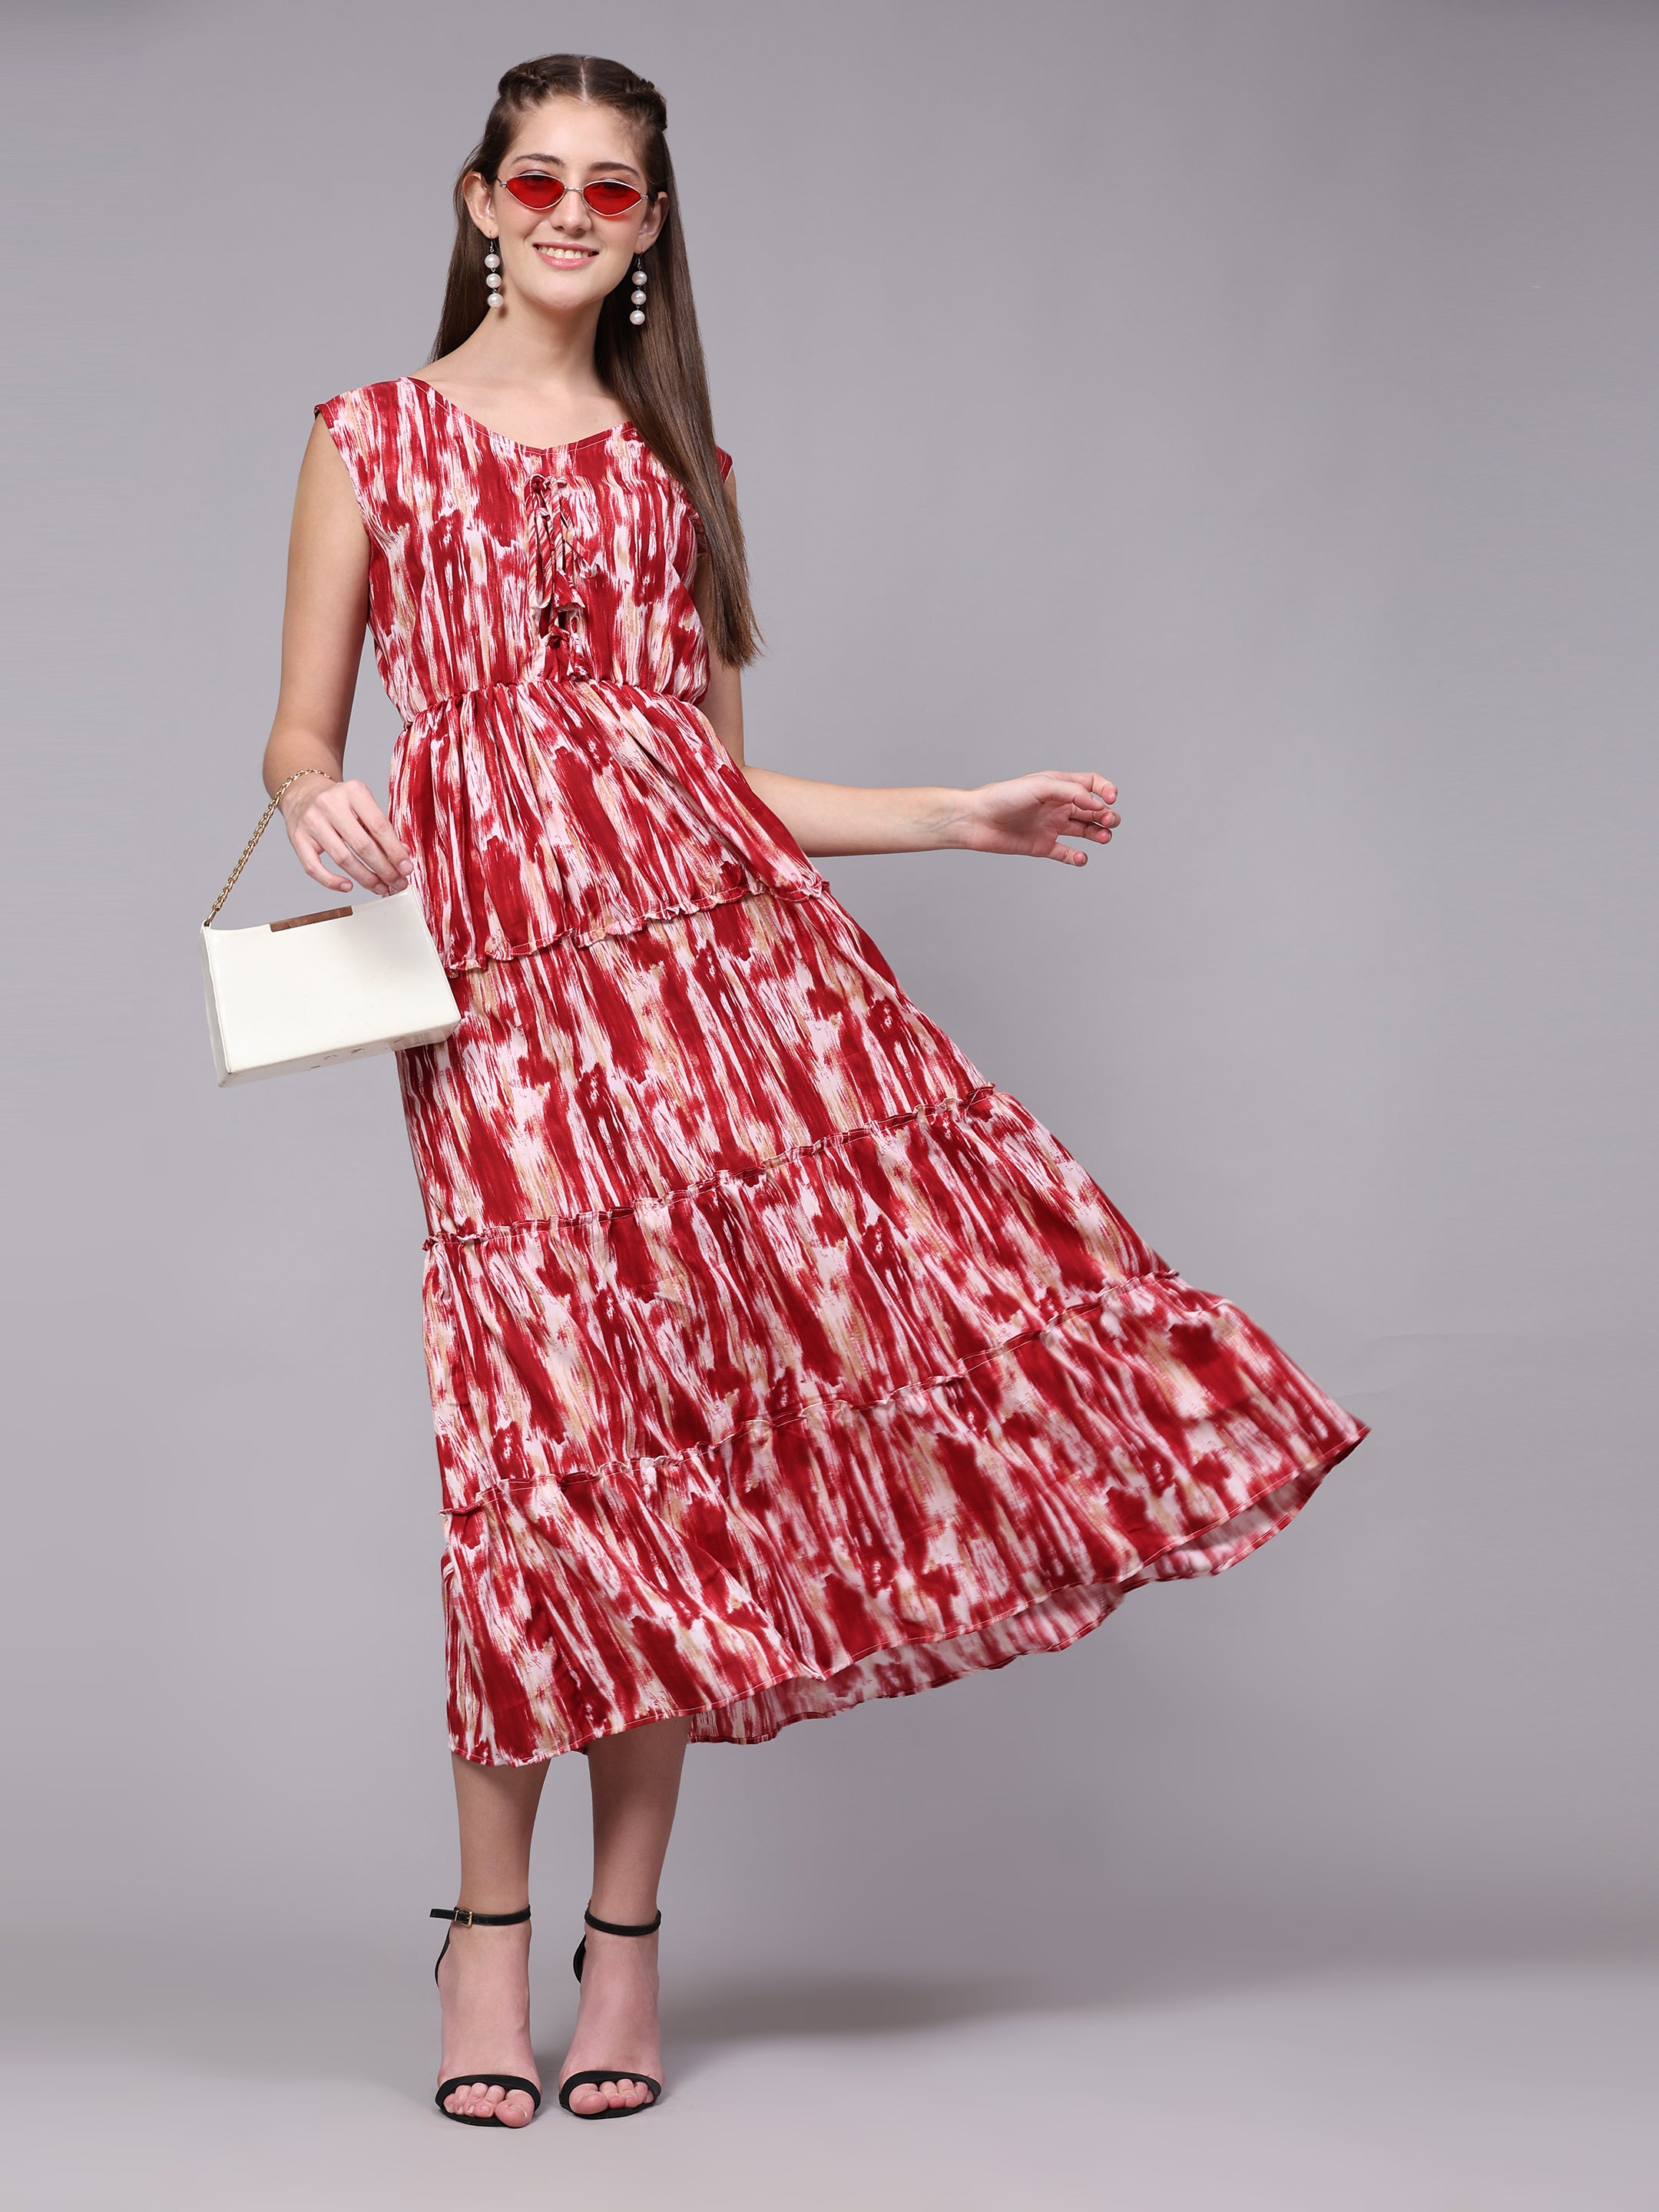 Tie Dyed Rayon Fancy Calf Length A-Line Sleeveless Dress For Women